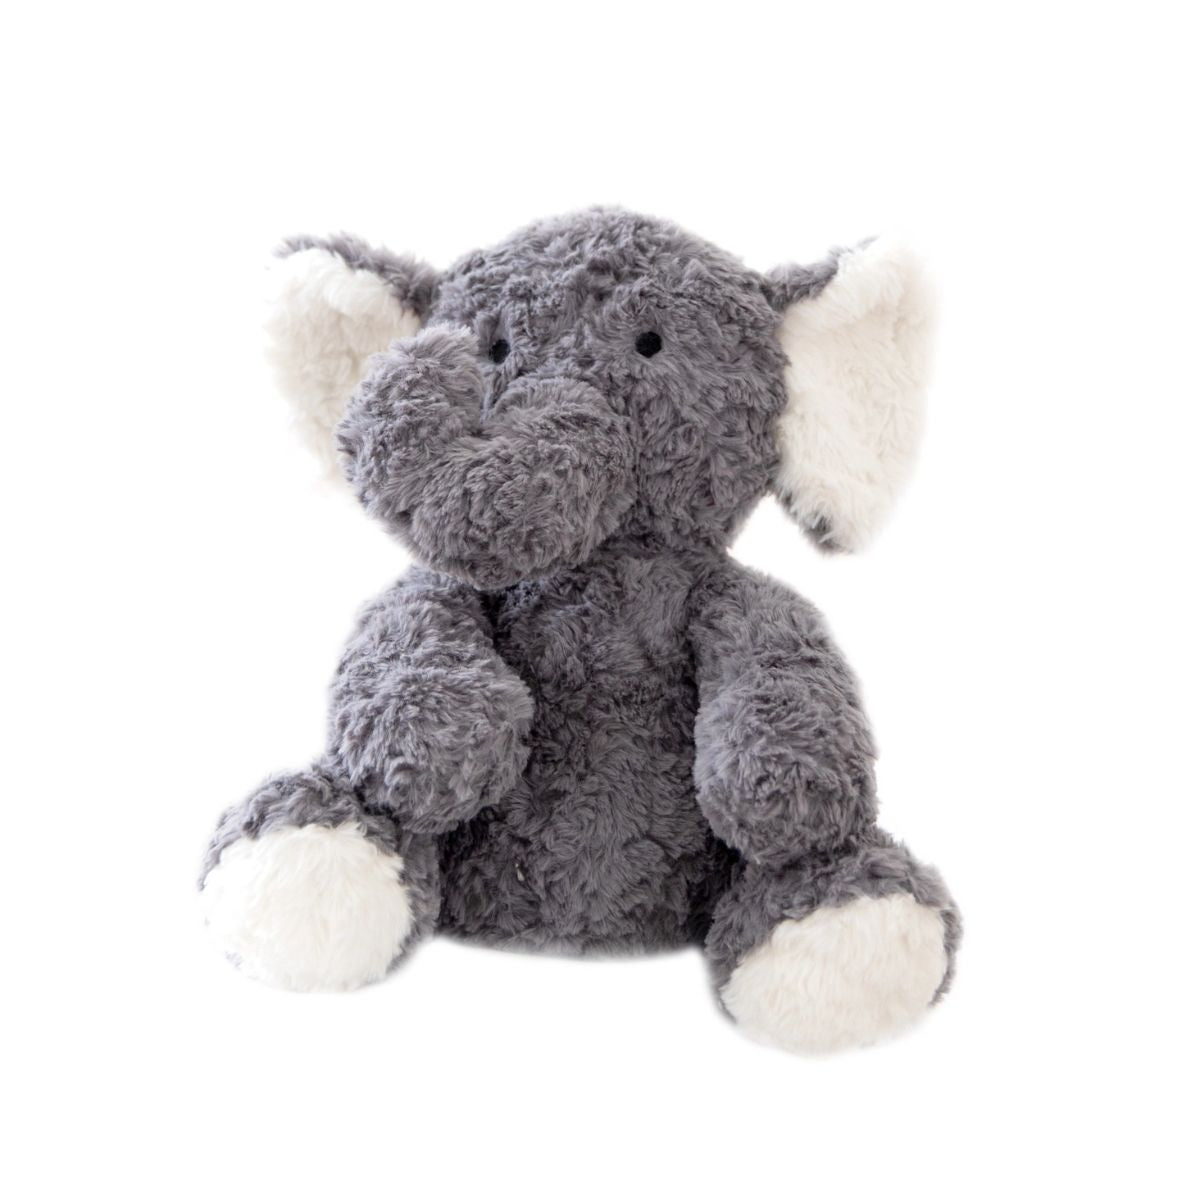 Eleanor the Weighted Elephant - Ultimate Sensory Toy for Kids